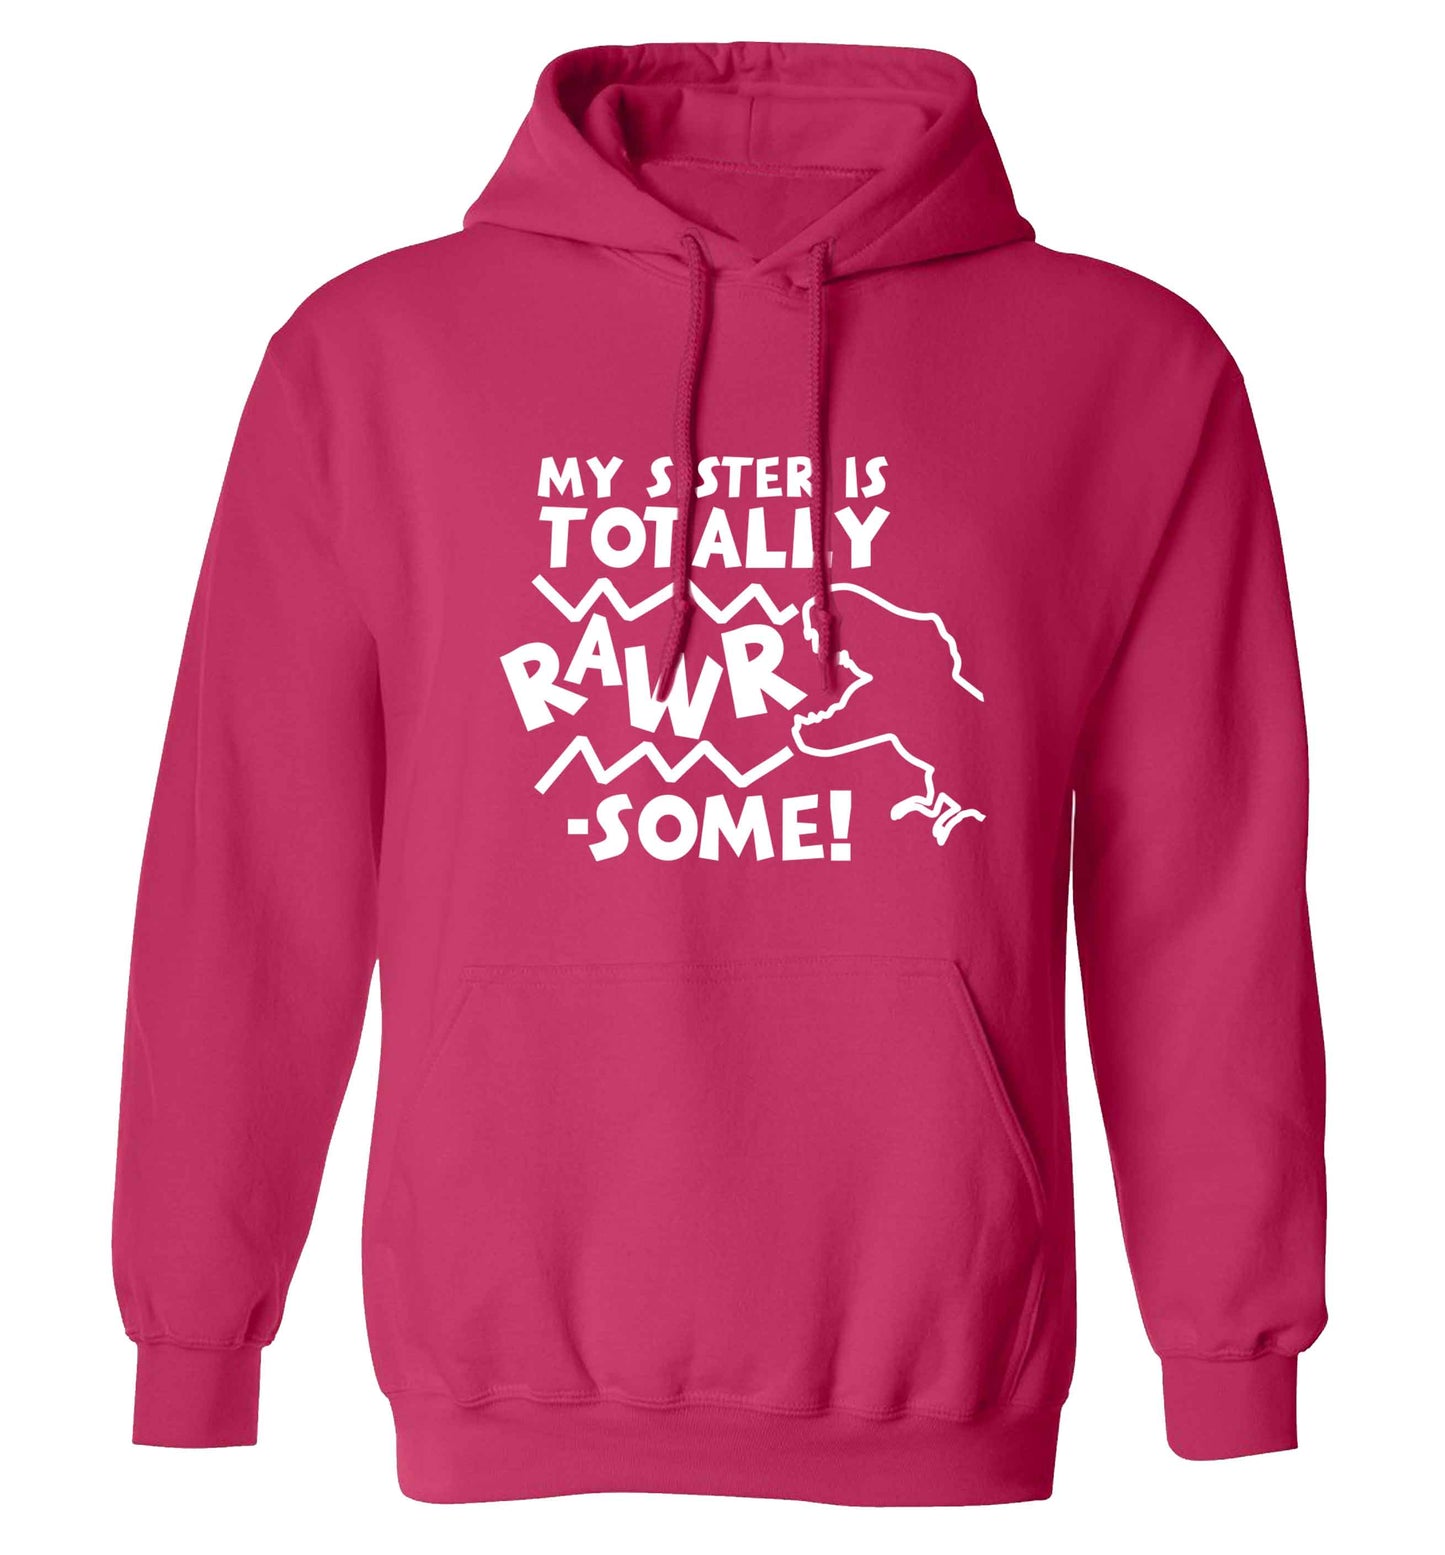 My sister is totally rawrsome adults unisex pink hoodie 2XL